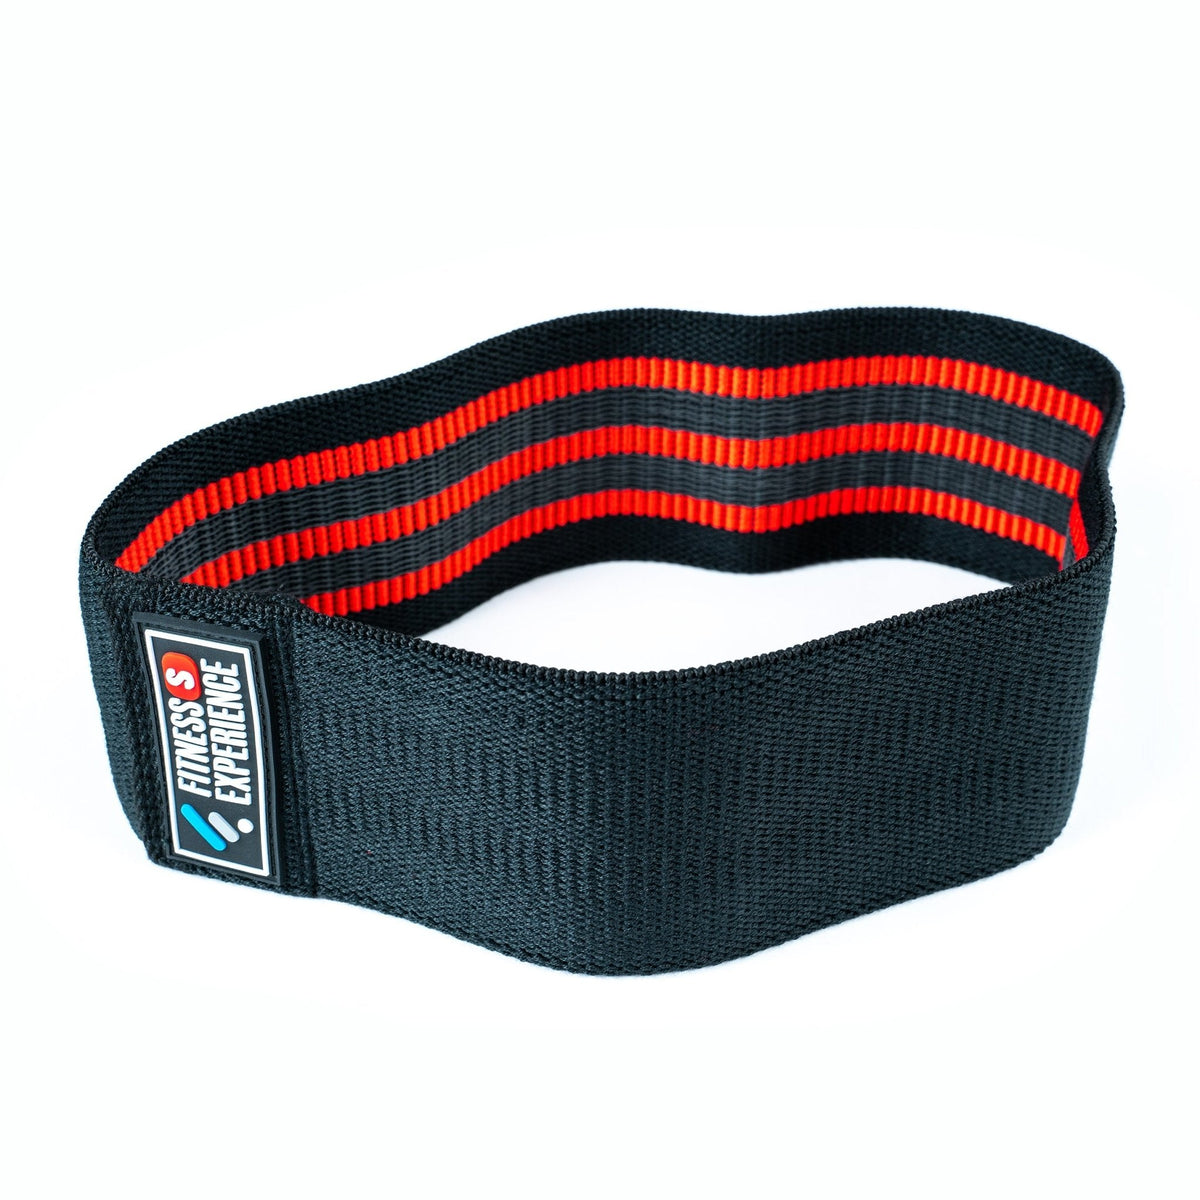 FitWay Equip. Max Fit Hip Band Set - Fitness Experience